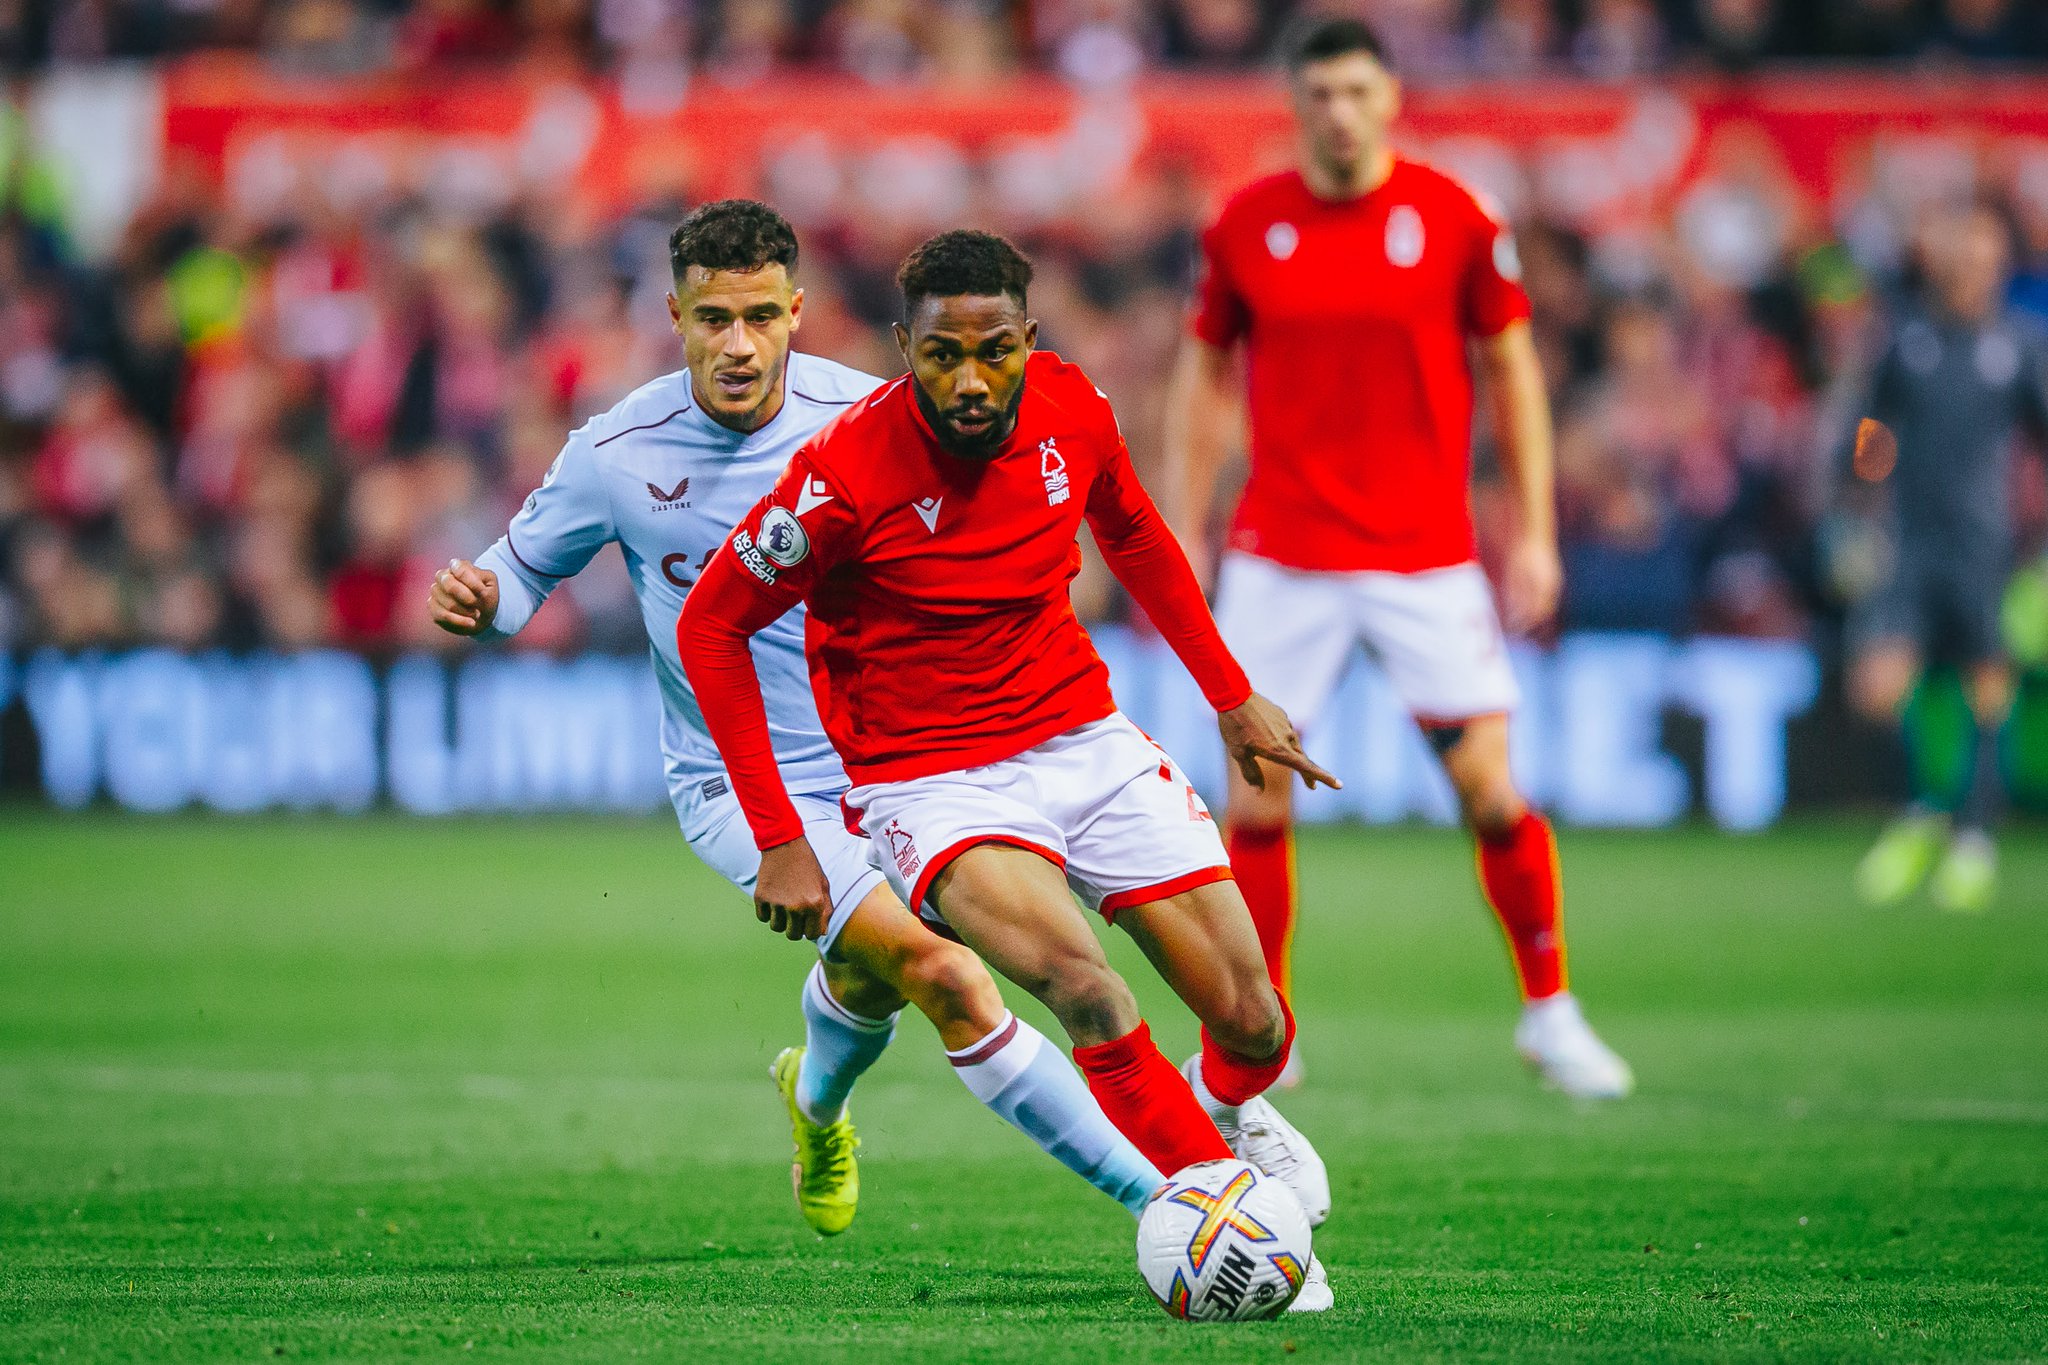 Dennis Scores First Goal For Nottingham Forest, Awoniyi Benched In Home Draw Vs Villa